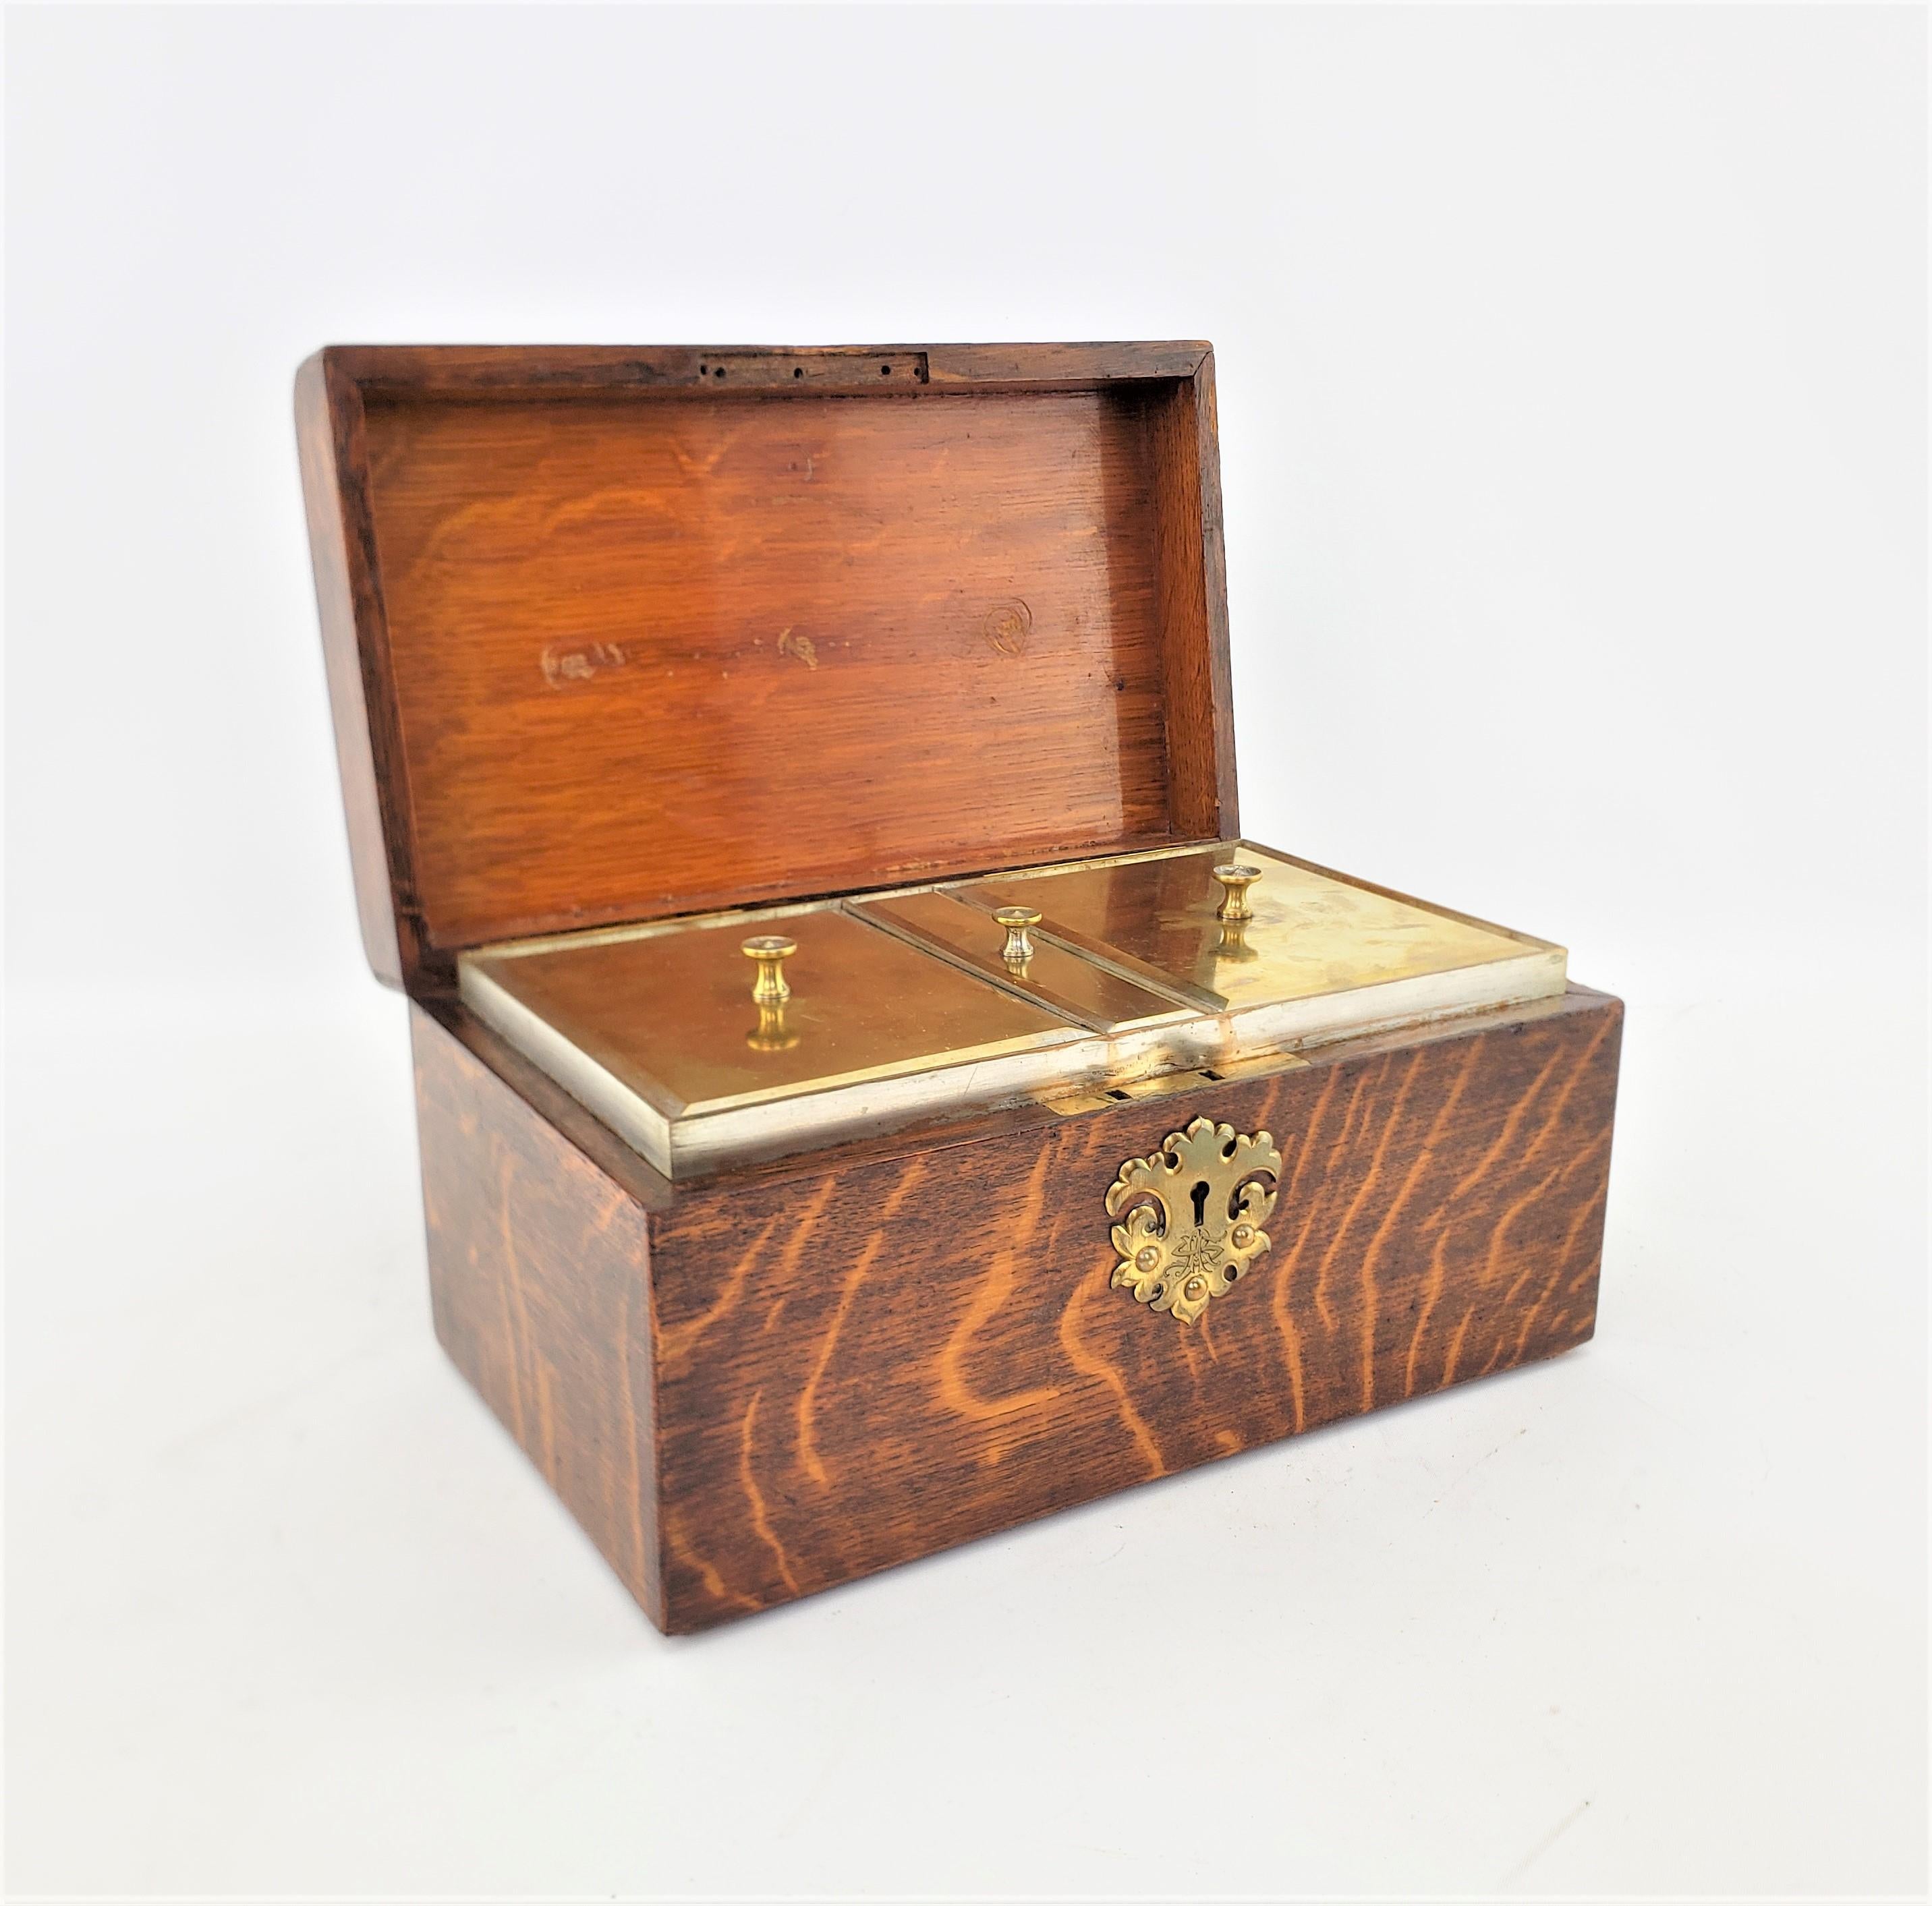 This antique tea caddy has no maker's marks, but presumed to have originated from England and date to approximately 1900 and done in a period Edwardian style. The outer case of the tea caddy is composed of what I believe to be fumed oak with a